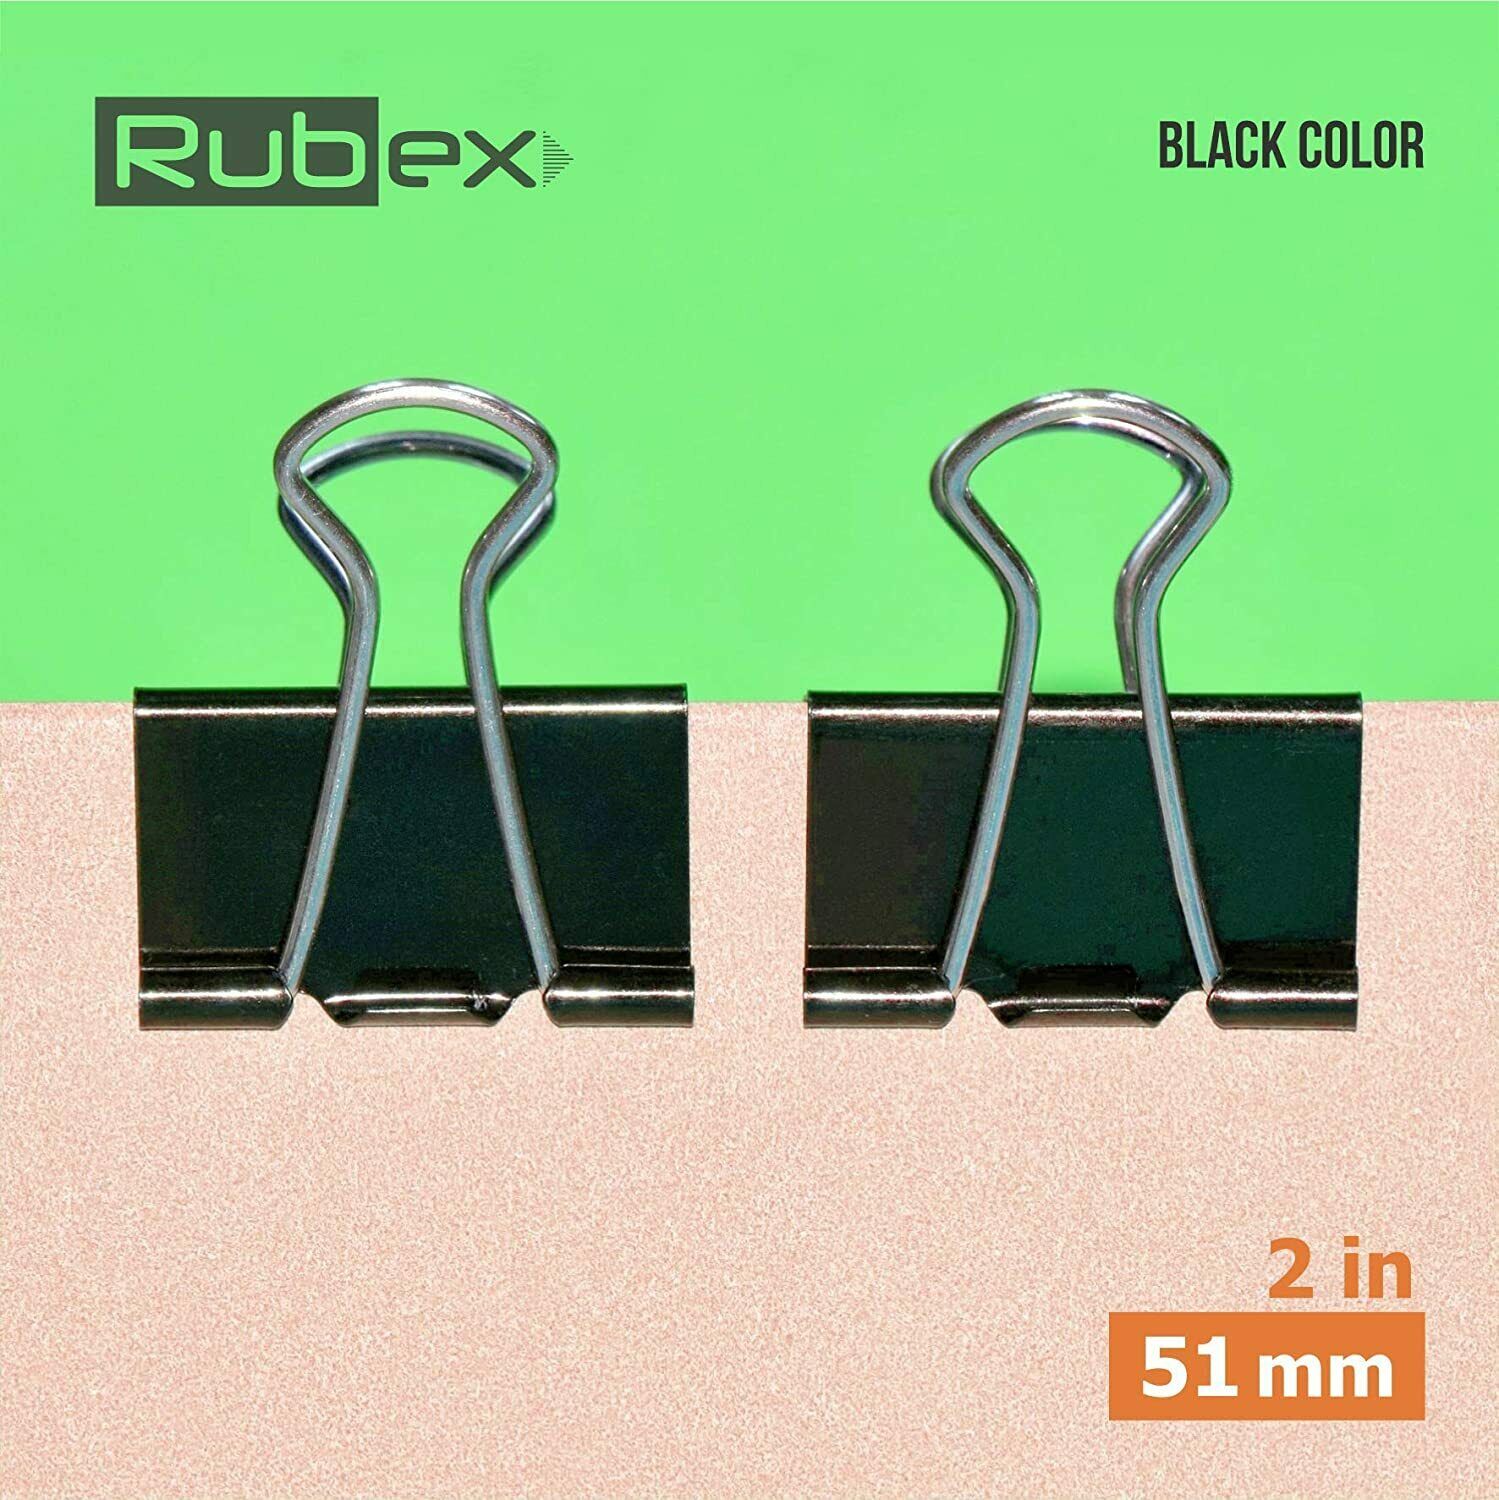 Rubex Binder Clips, Extra Large Binder Clips, Jumbo Binder Clips,2 Inch 36 Count